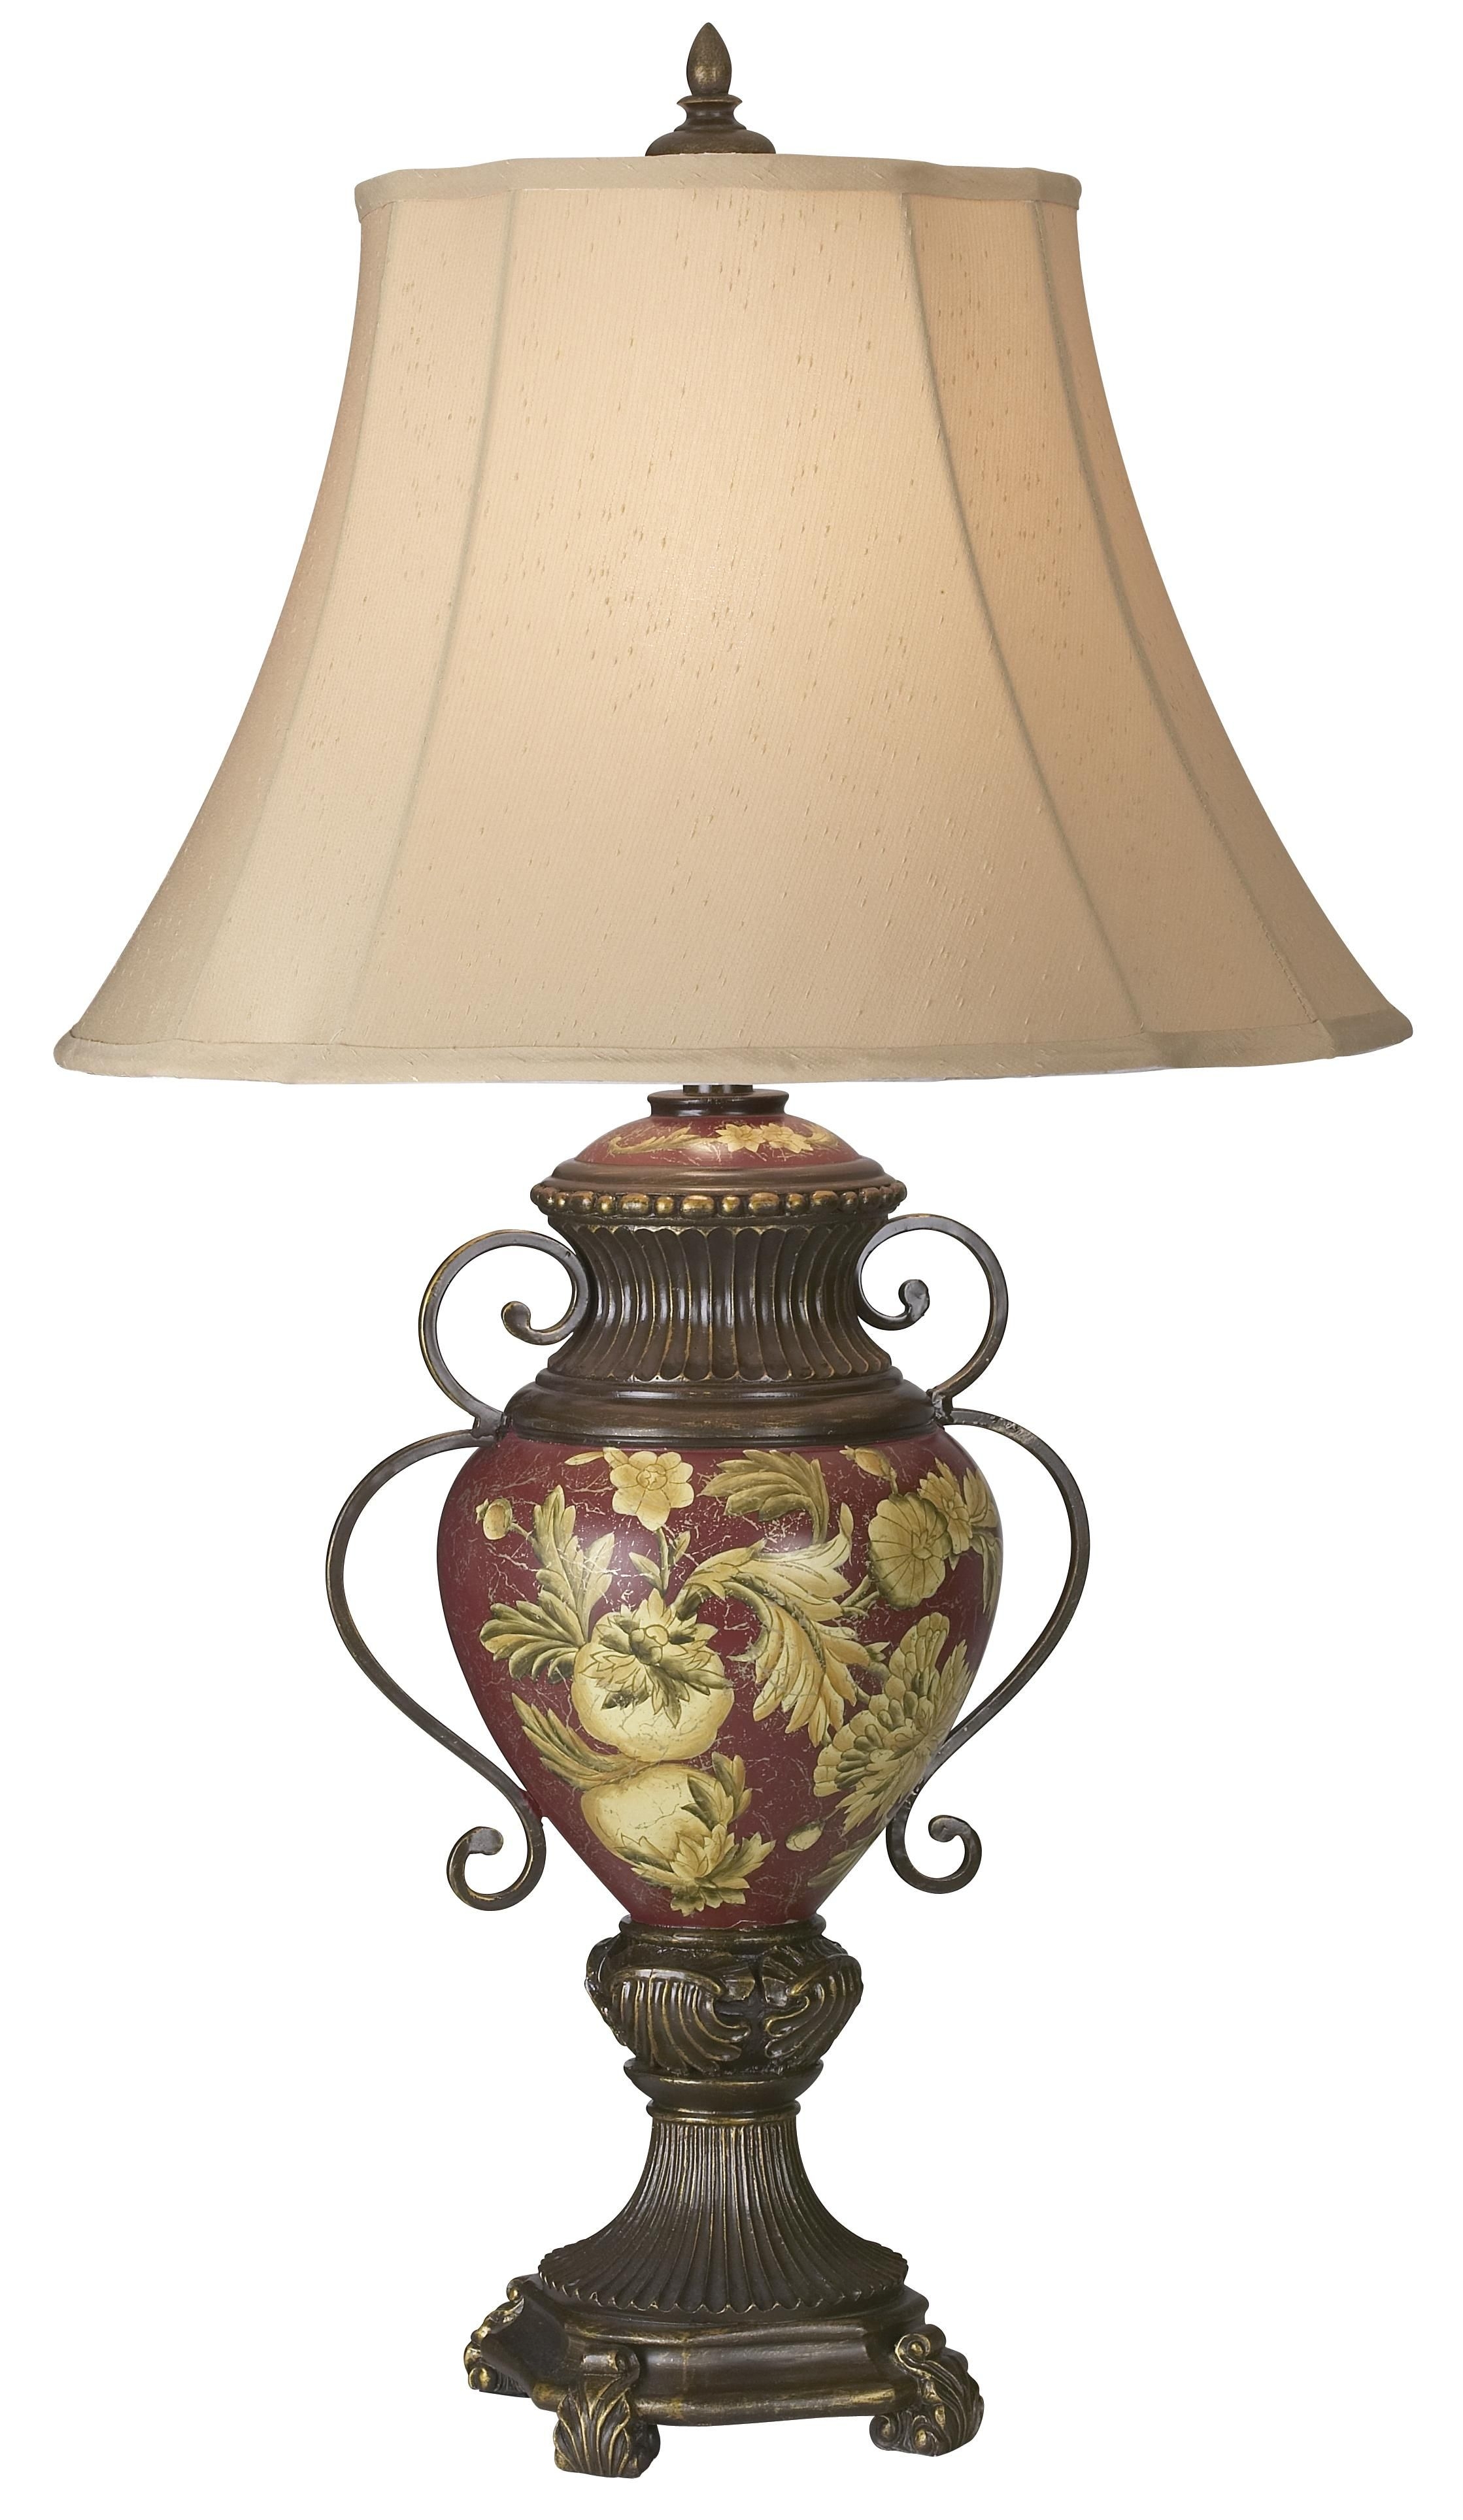 Possini r collection tuscan red floral urn synopsis lamp 00754